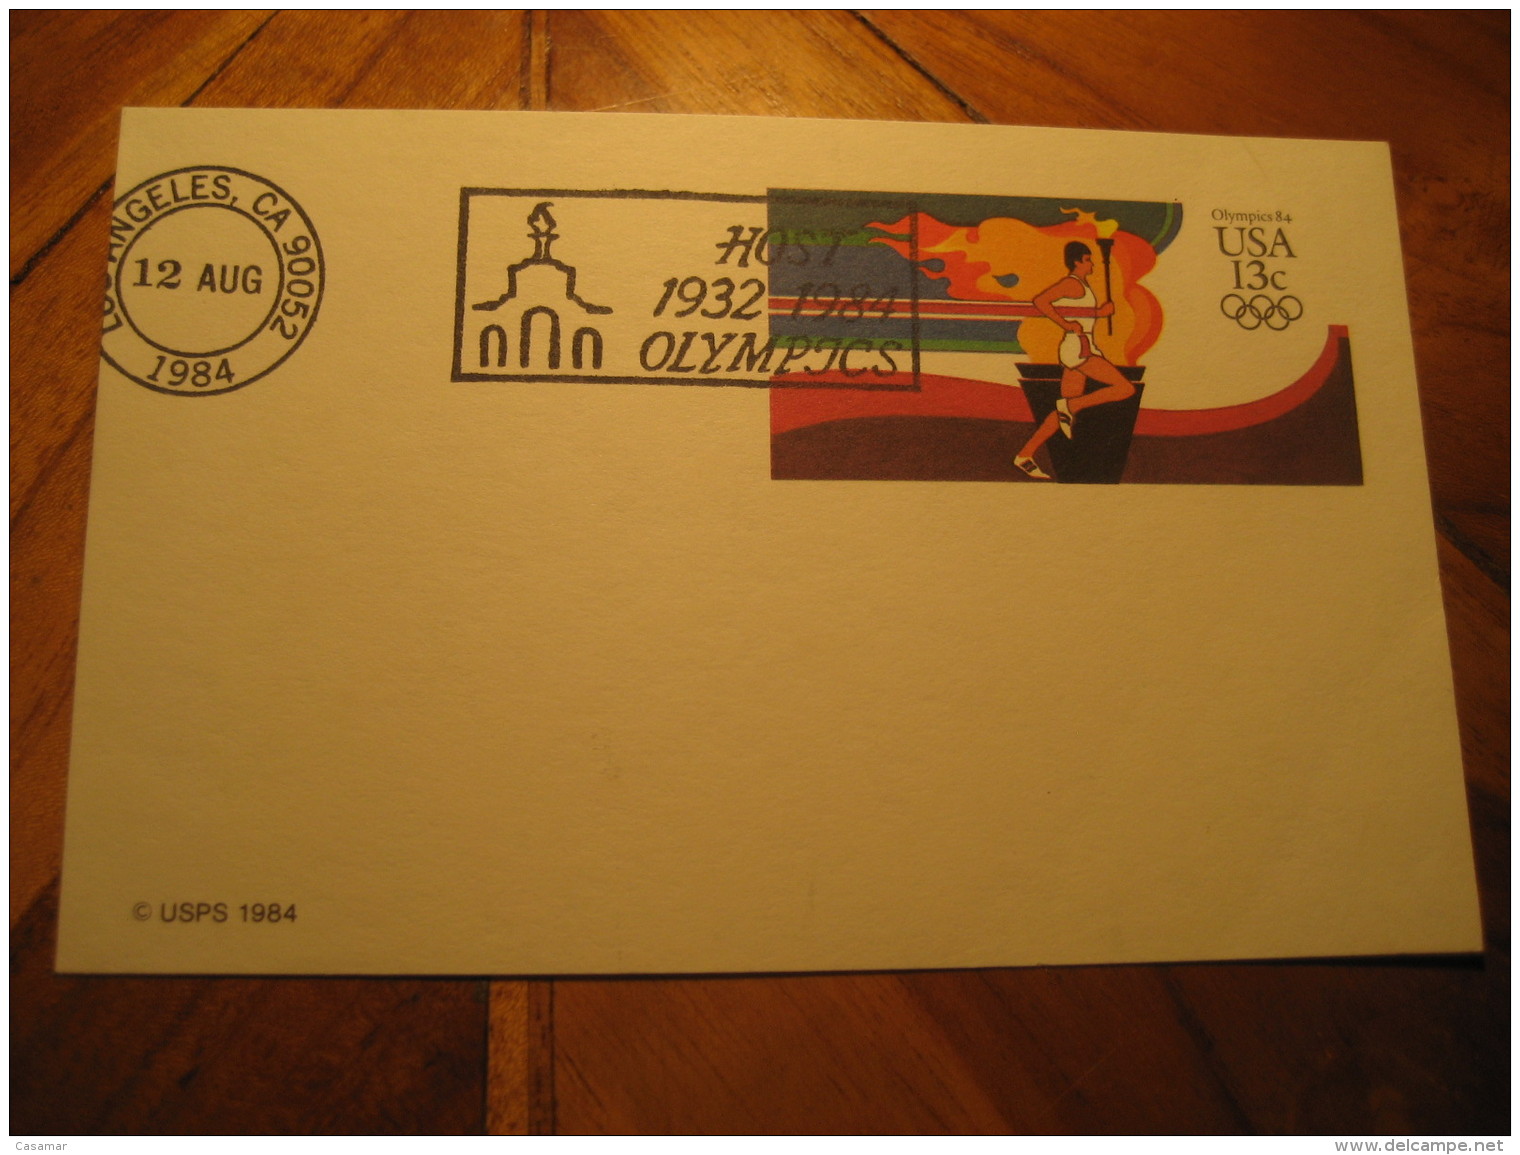 LOS ANGELES 1932 Olympic Games Olympics 1984 Torch Postal Stationery Card USA - Ete 1932: Los Angeles